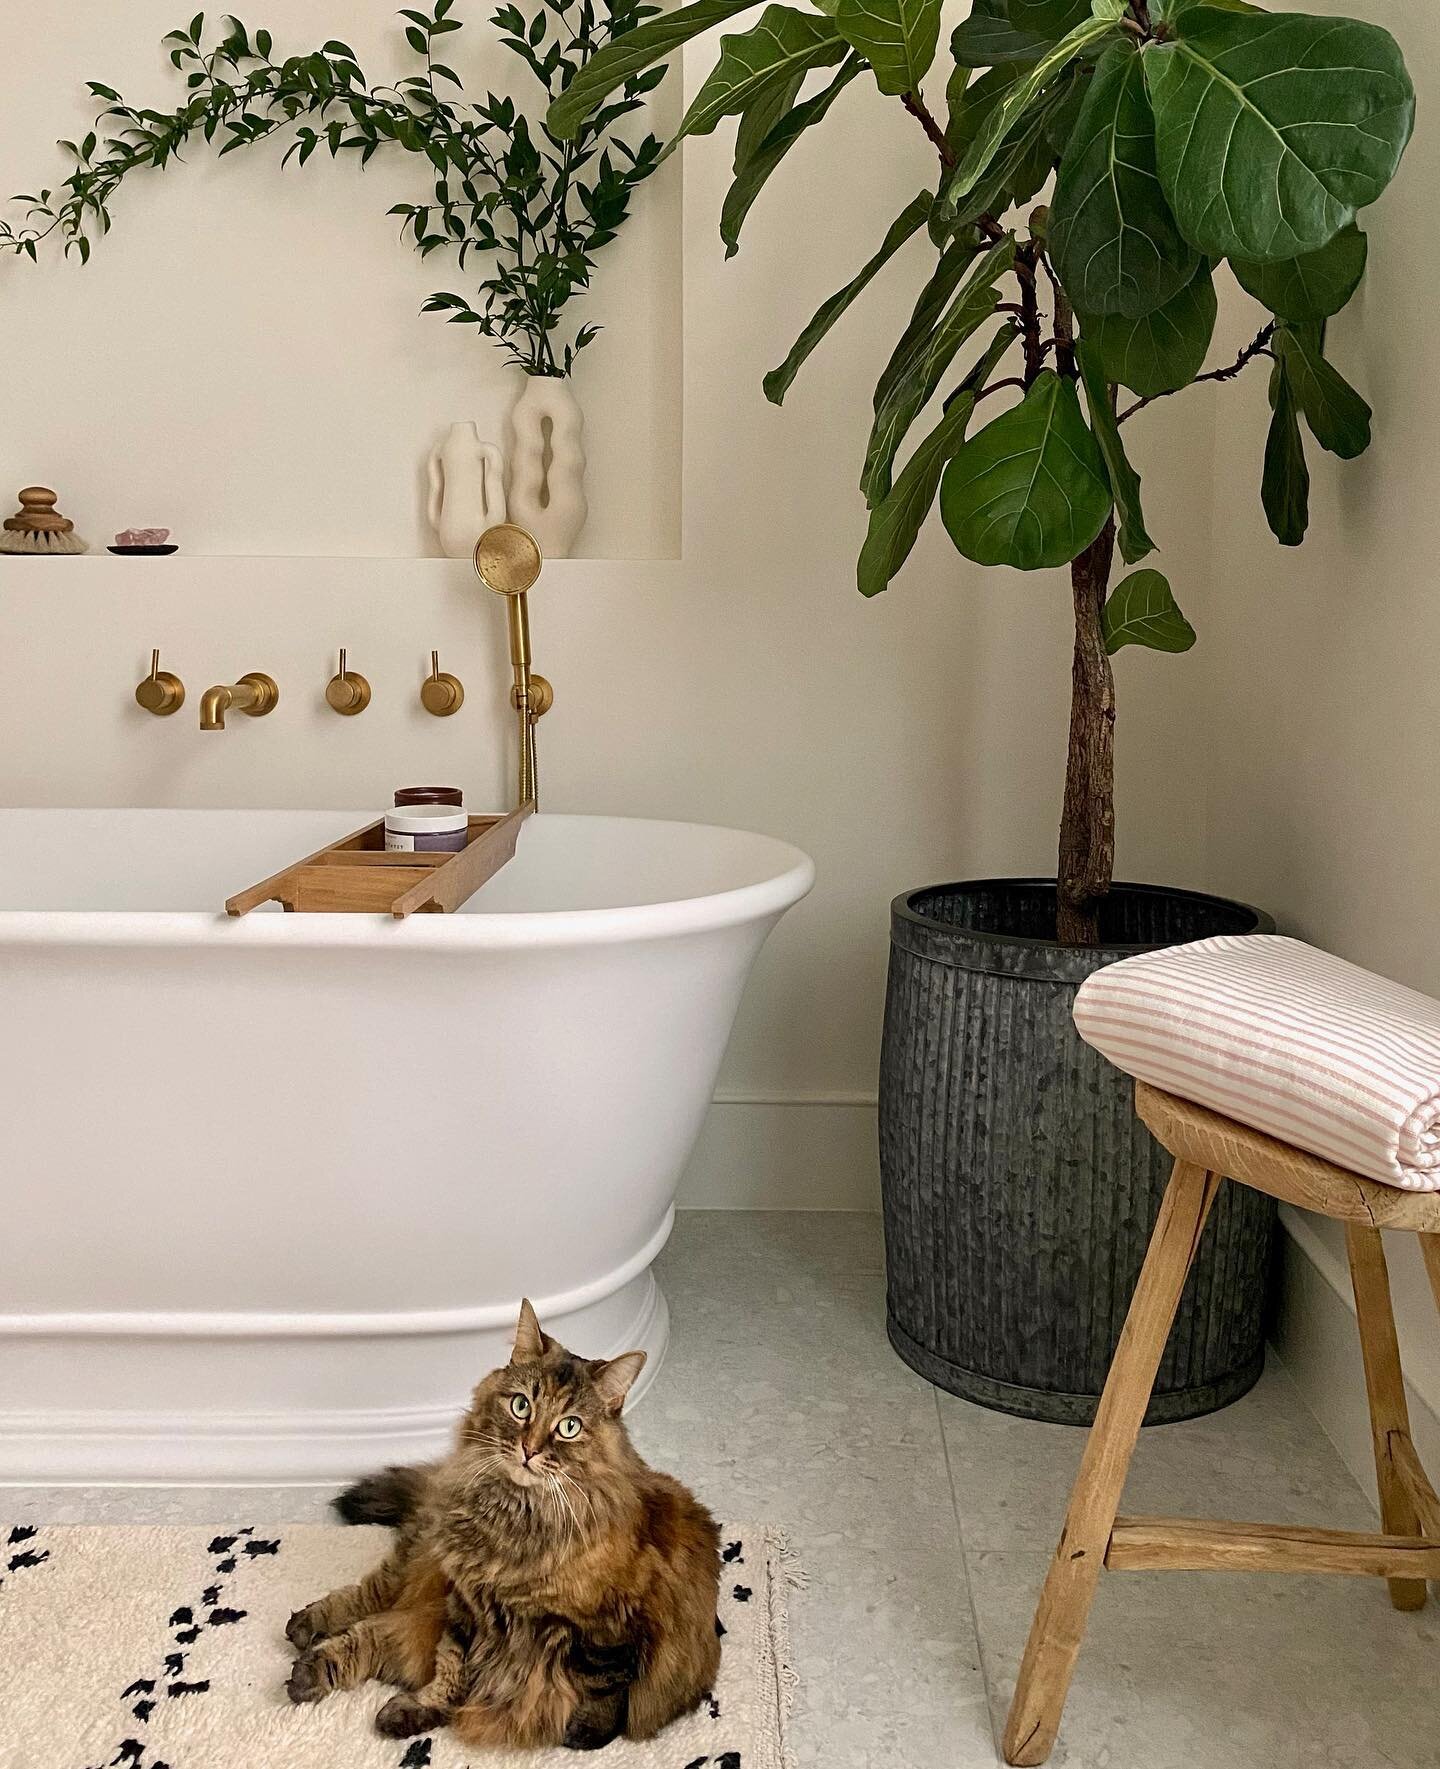 Mirror mirror on the wall, who&rsquo;s the prettiest kitty-cat of them all? 💕🐱 #bathroominspo #bathroomdesign #catsofinstagram #freestandingbath #archniche #laidbackluxury #modernglamour #fiddleleaffig [Tap for tags!]